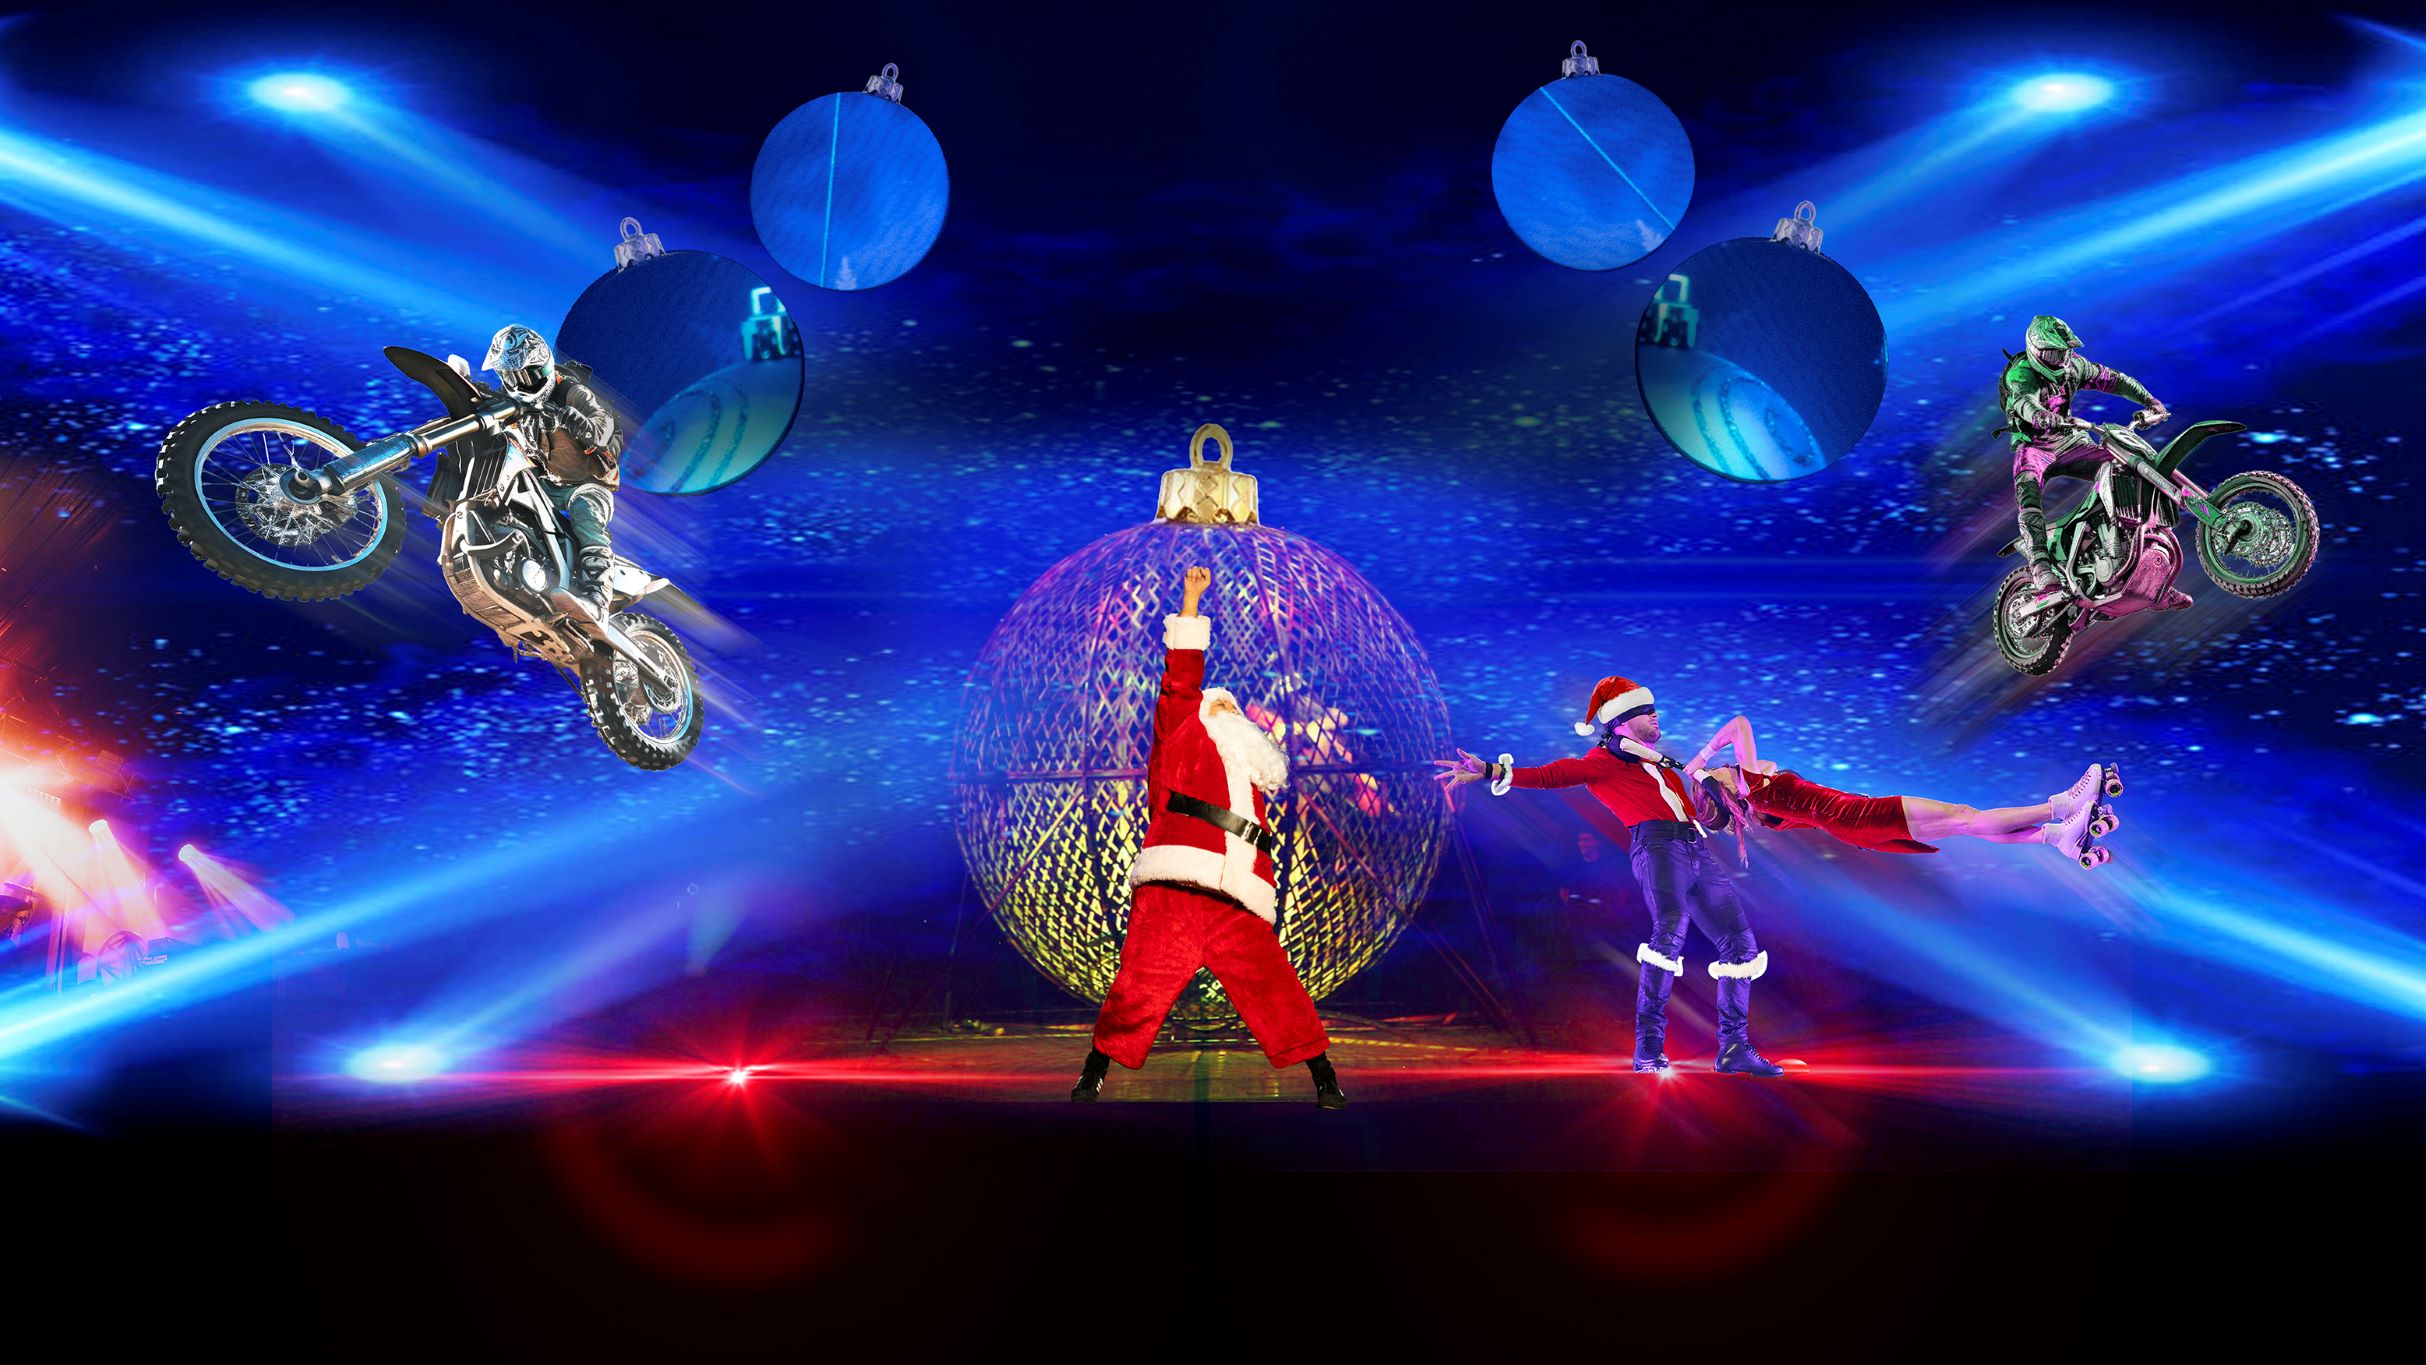 A Holiday Circus Spectacular! - A Christmas Rockstory in Winnipeg promo photo for Special Discount  presale offer code